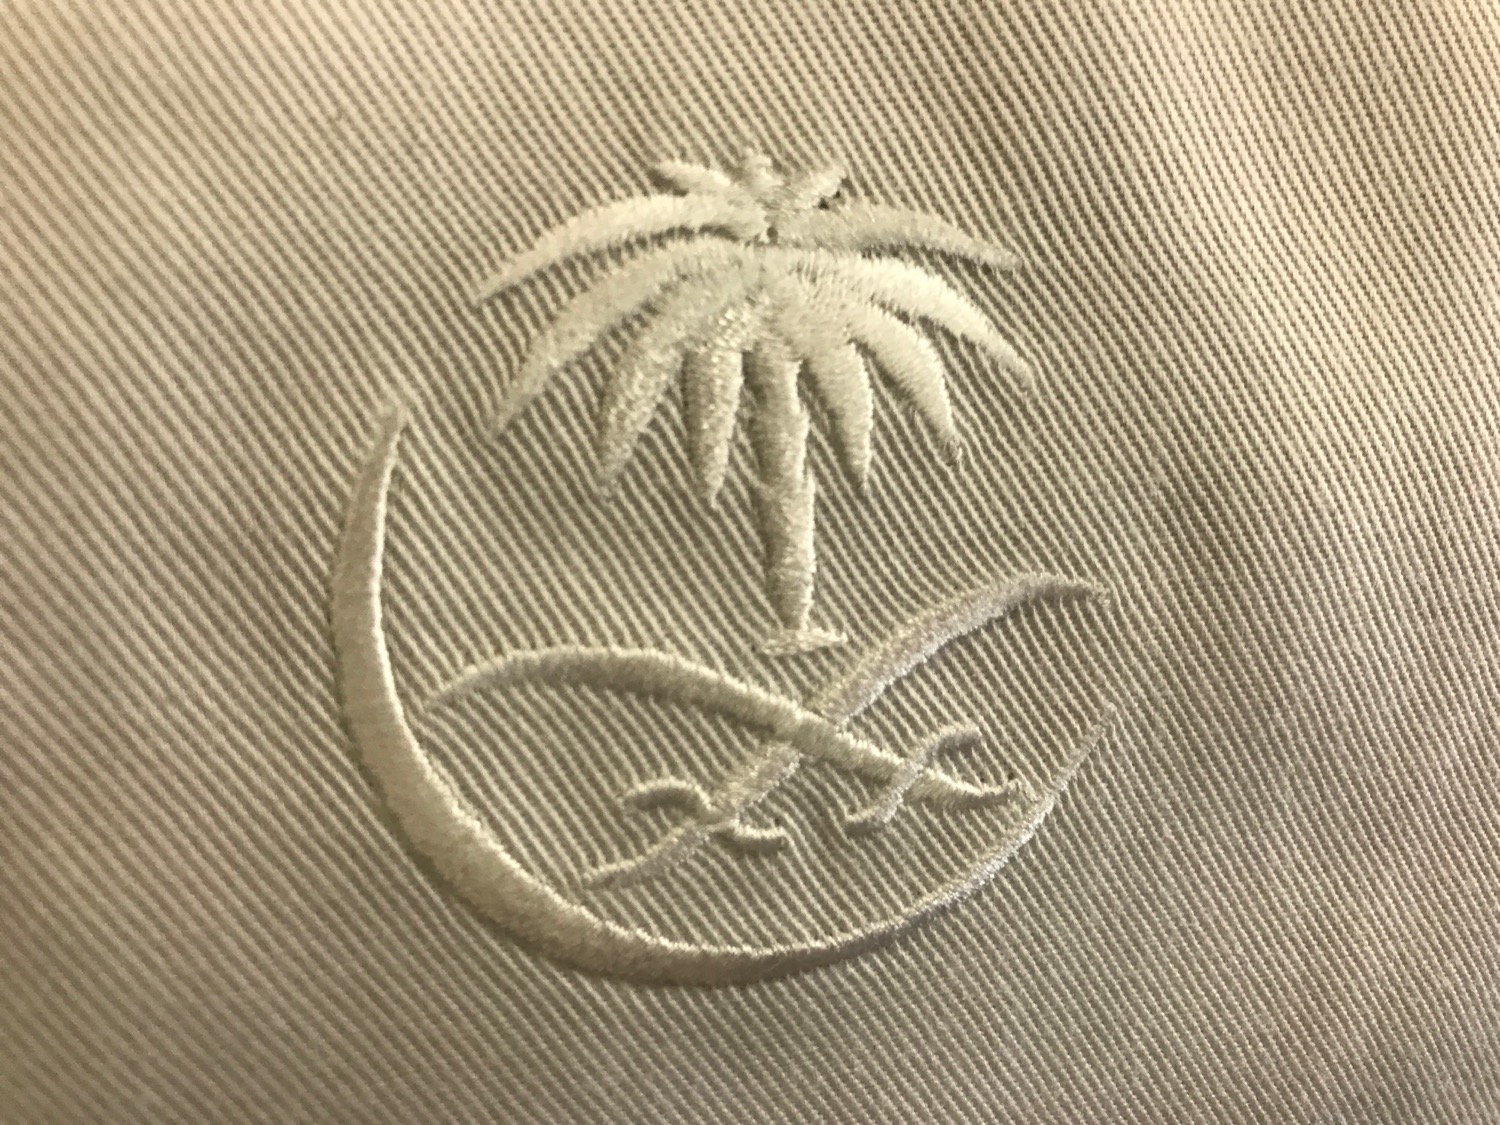 Embroidered white logo on tan fabric